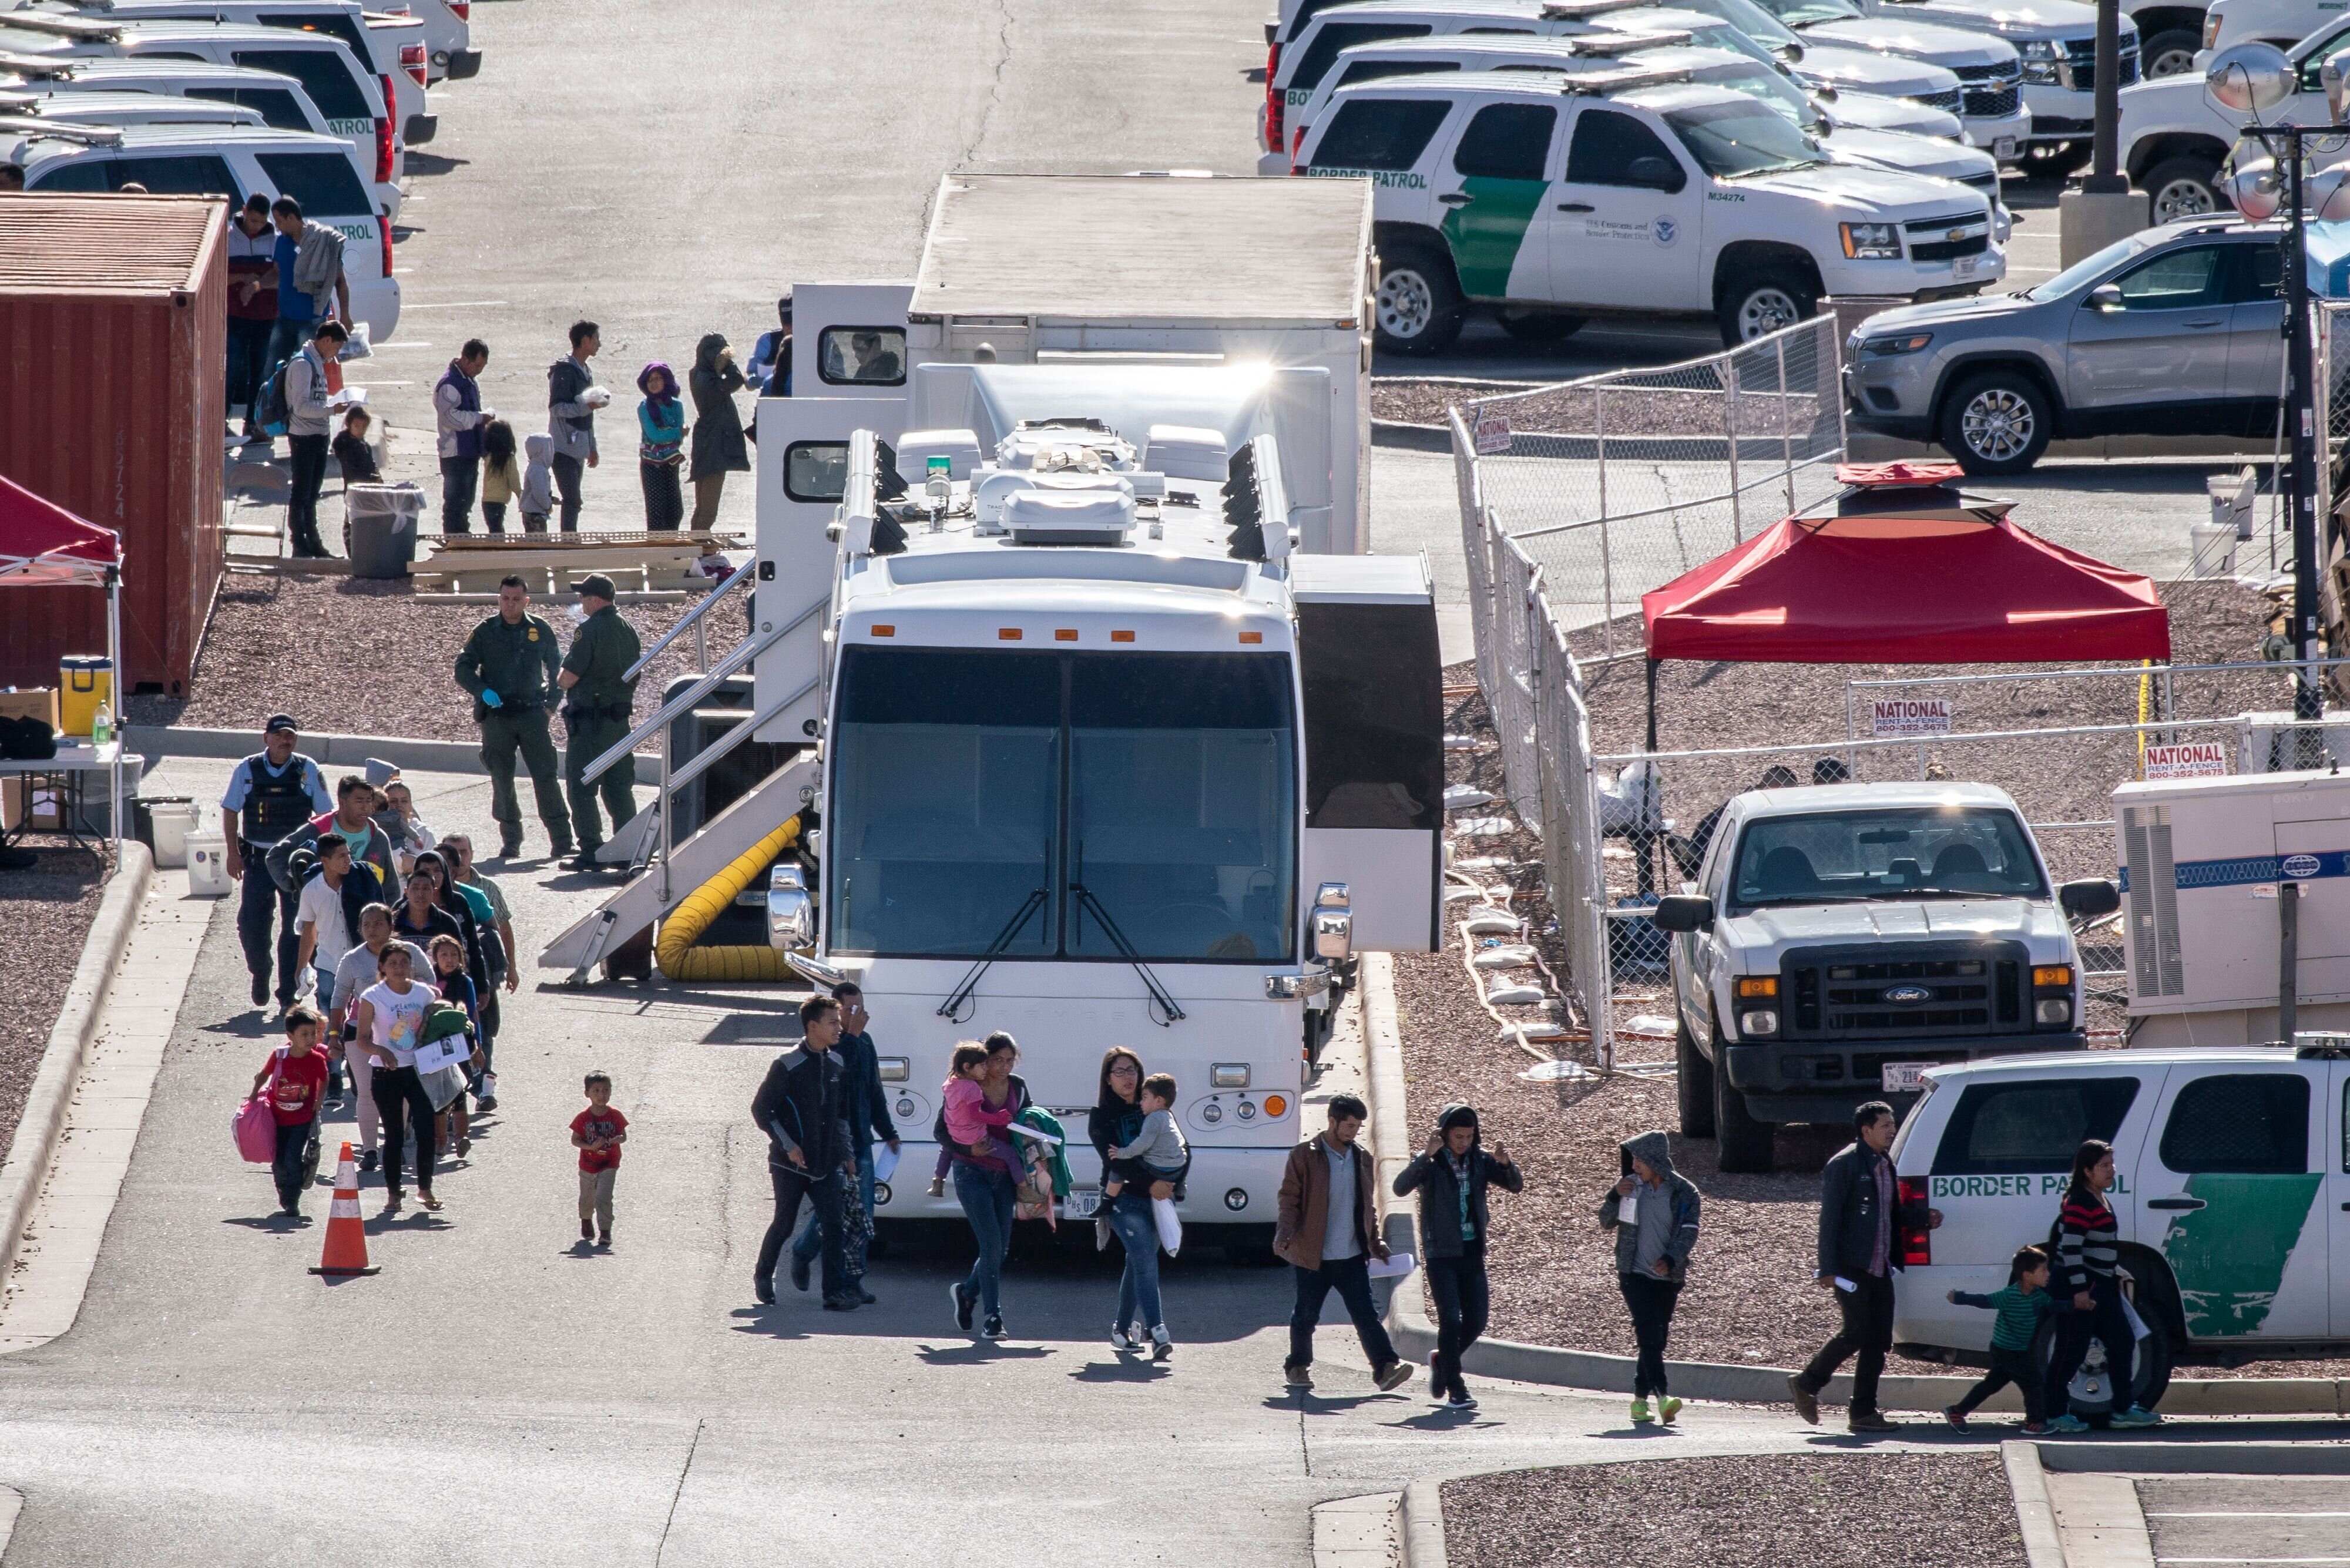 Trump Admin. Is Transporting More Migrants From Border To Other U.S. Cities